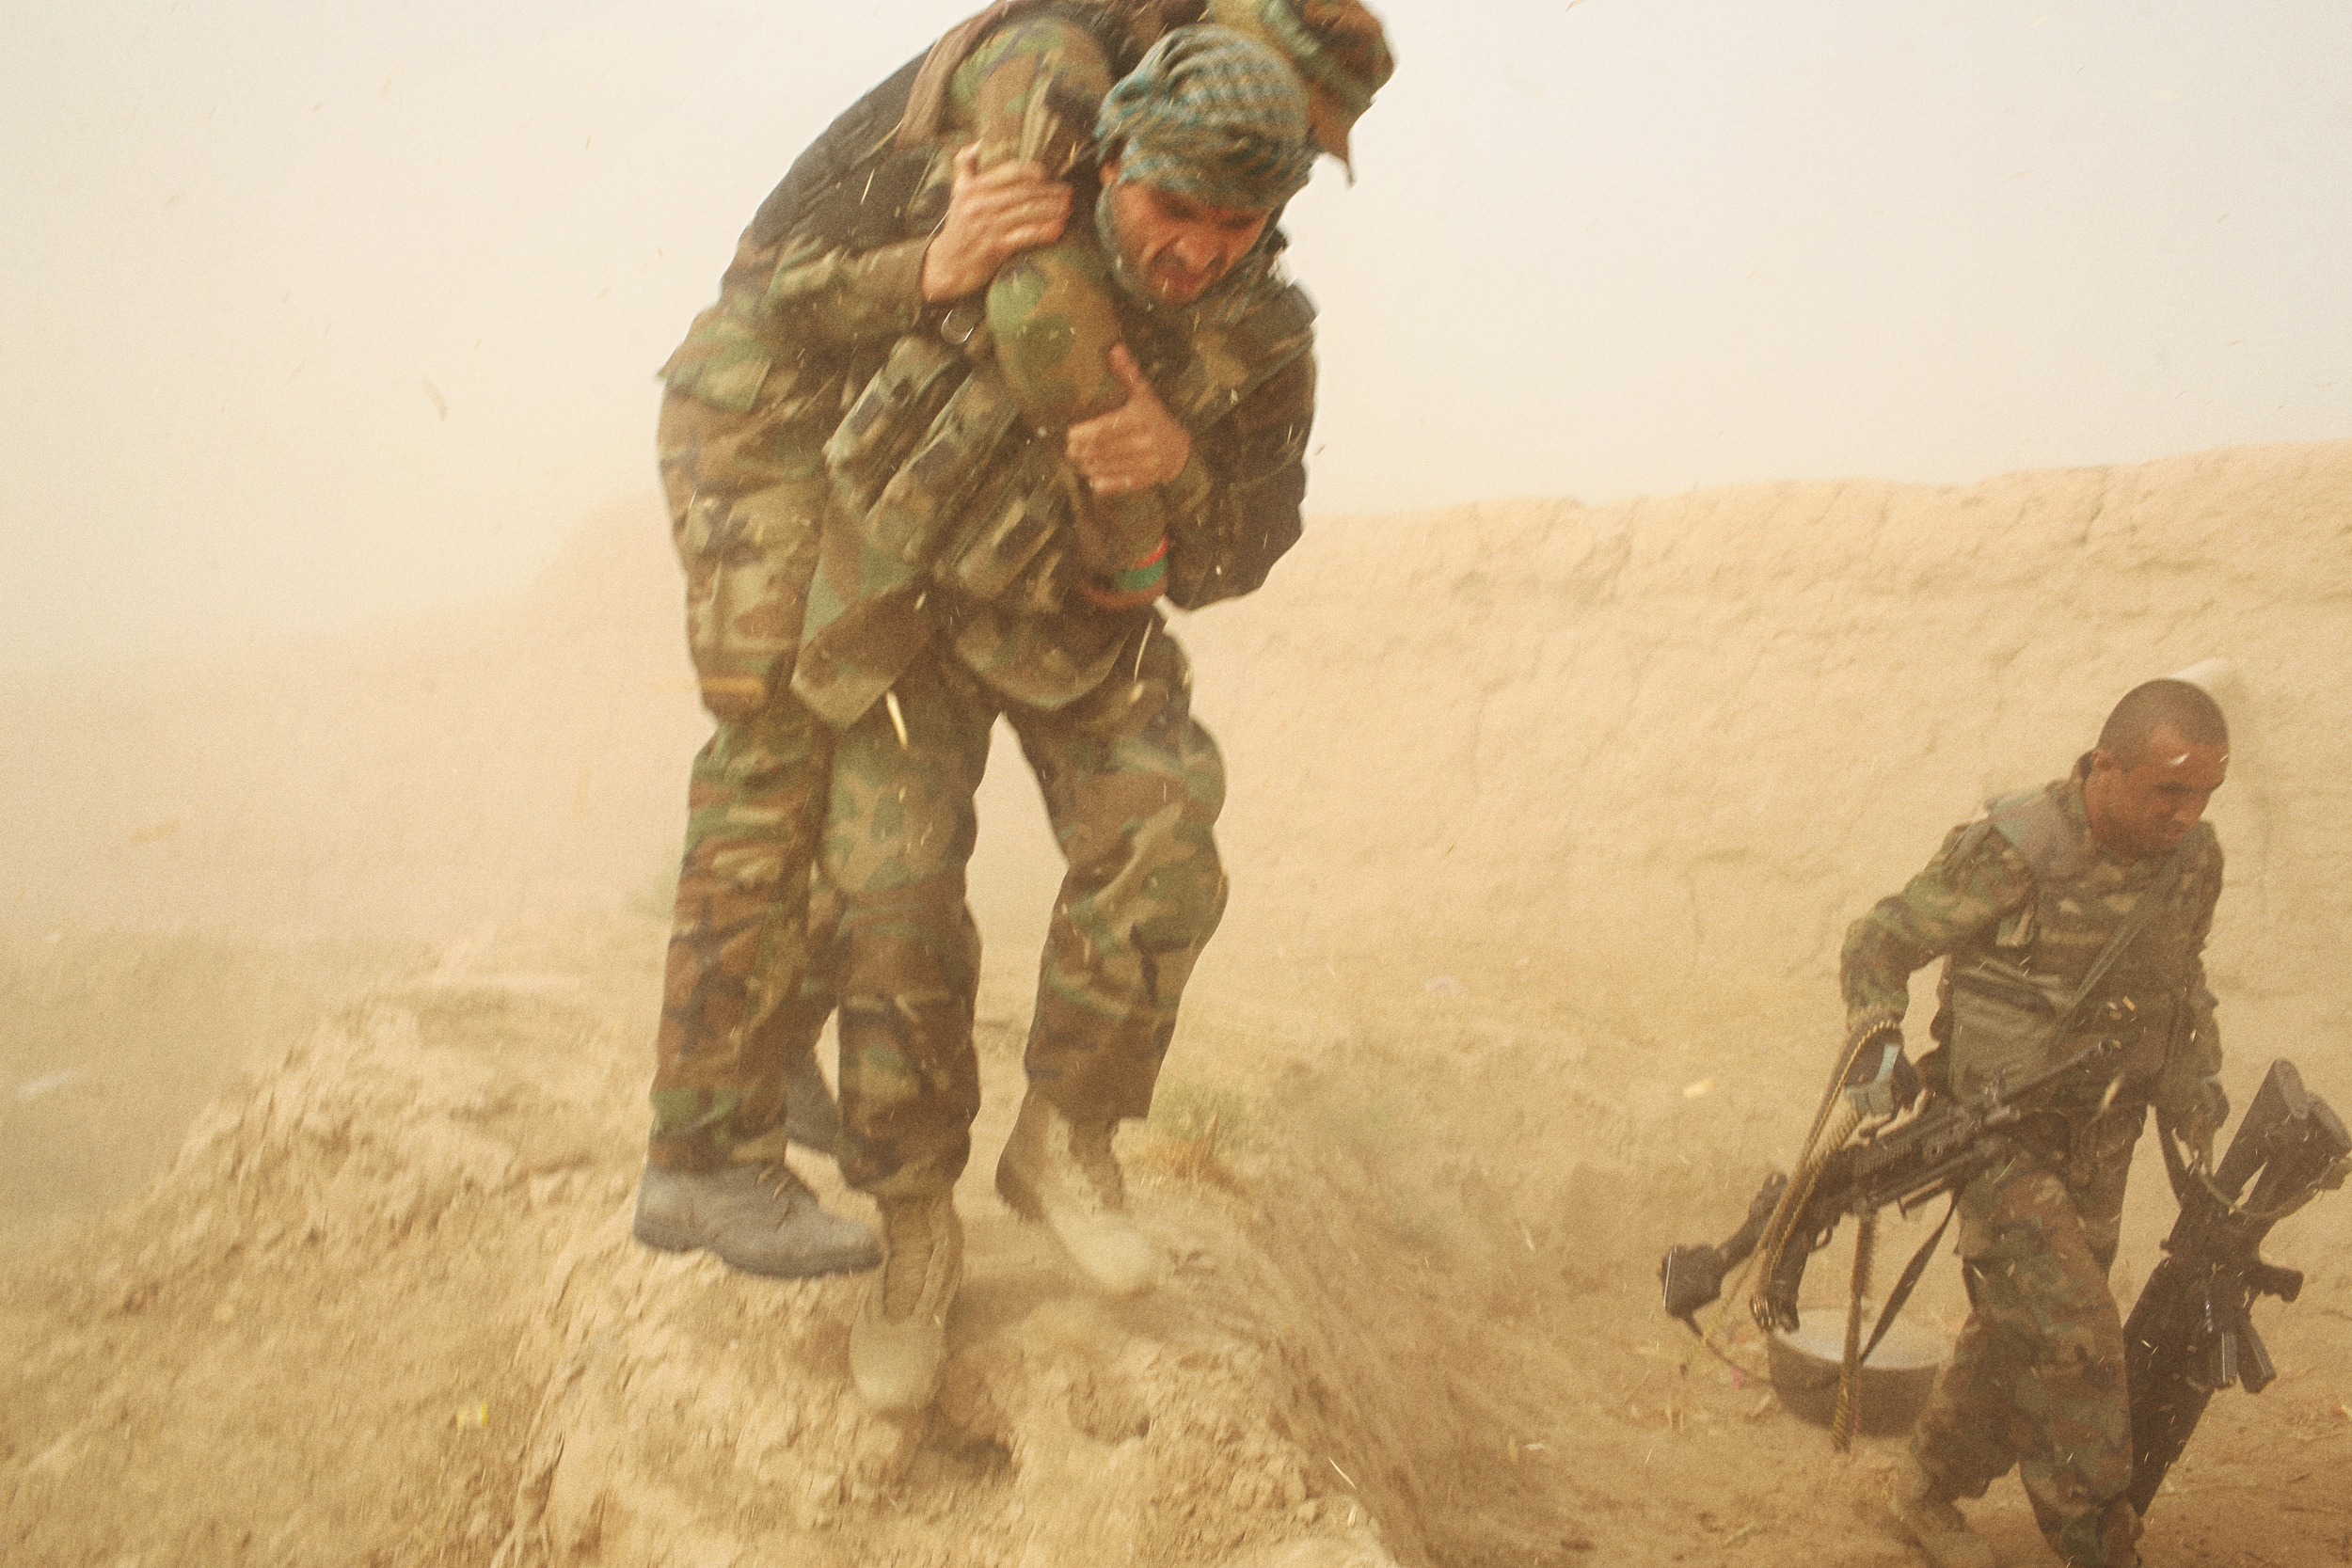  An Afghan National Army soldier carries another soldier after he was wounded by the back-blast of an ANA rocket propelled grenade during the battle to retake the City of Kunduz after the Taliban overran it a week prior. It was the first city to fall to the group since 2001. Kunduz Province, October, 2015. 